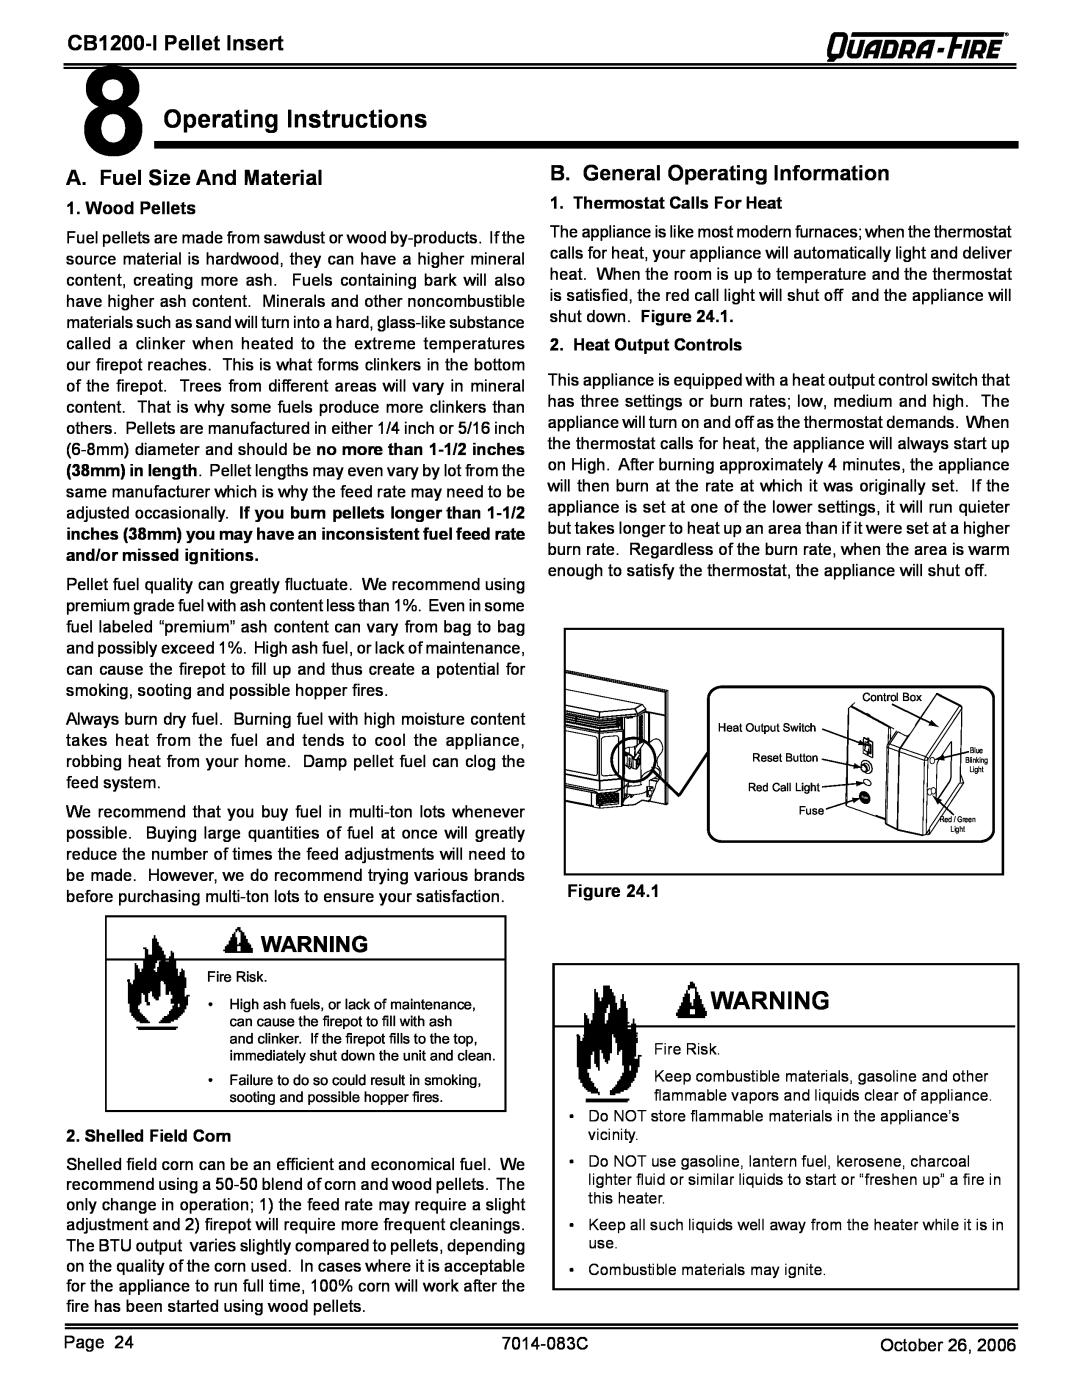 Quadra-Fire CB1200I-B owner manual Operating Instructions, Fuel Size And Material, B. General Operating Information 